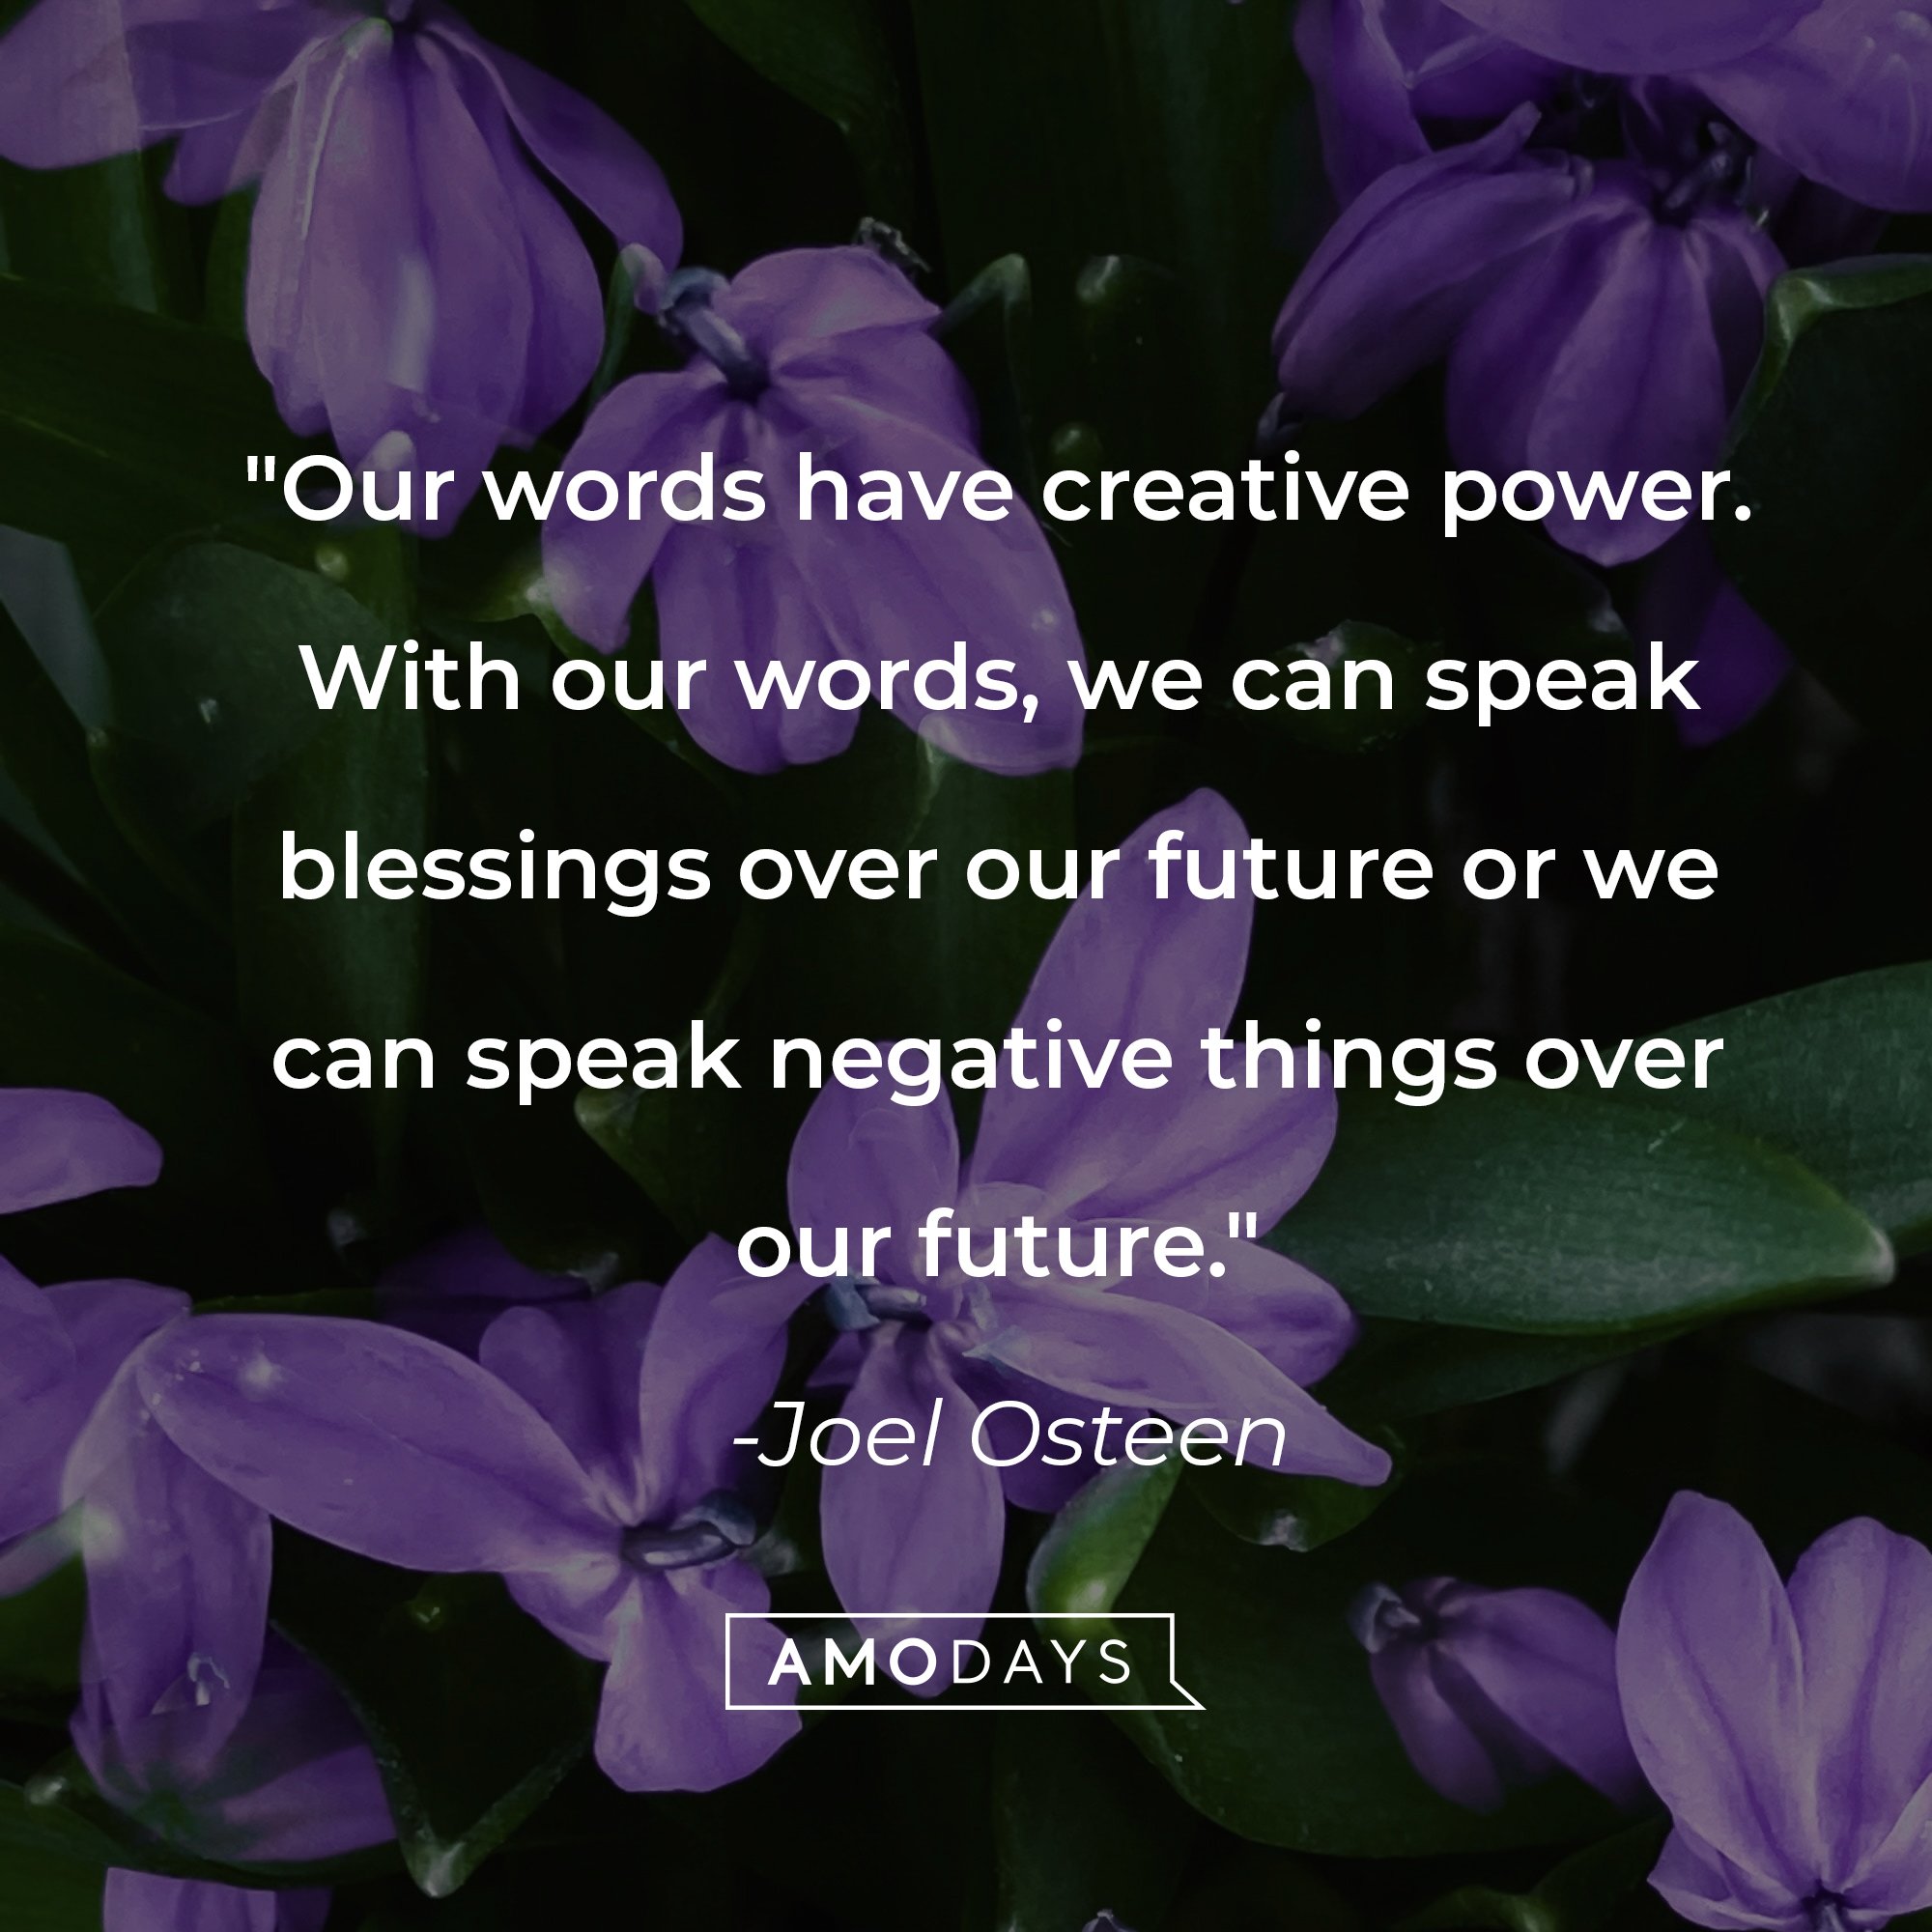 Joel Osteen's quote: "Our words have creative power. With our words, we can speak blessings over our future or we can speak negative things over our future." | Image: AmoDays